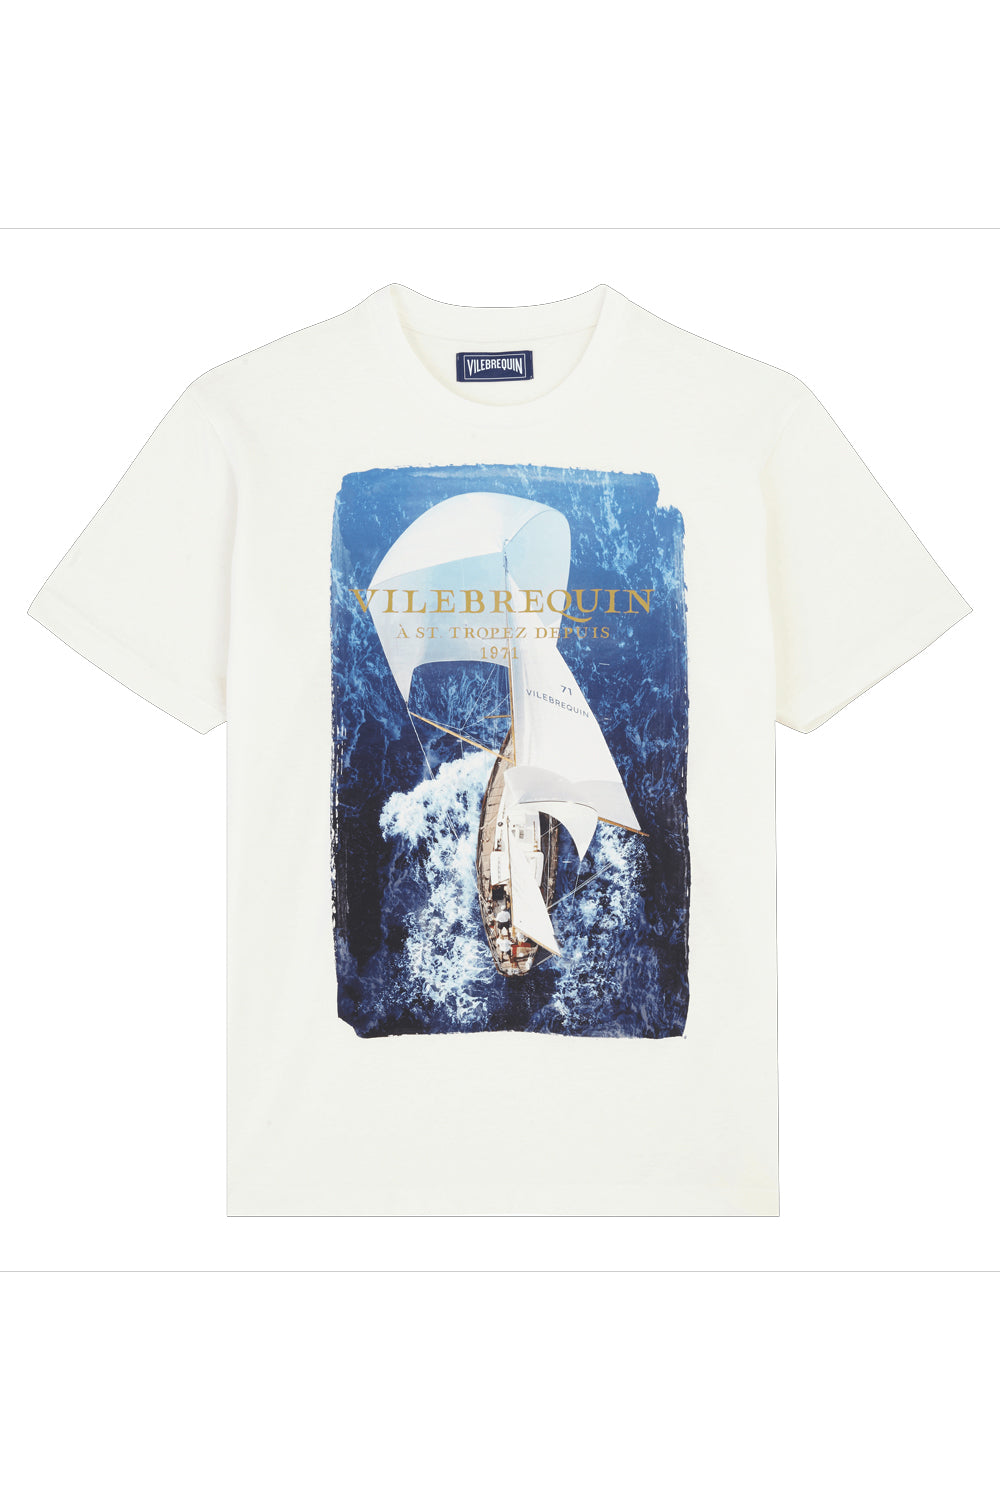 VILEBREQUIN T-shirt Sailing Boat from the Sky